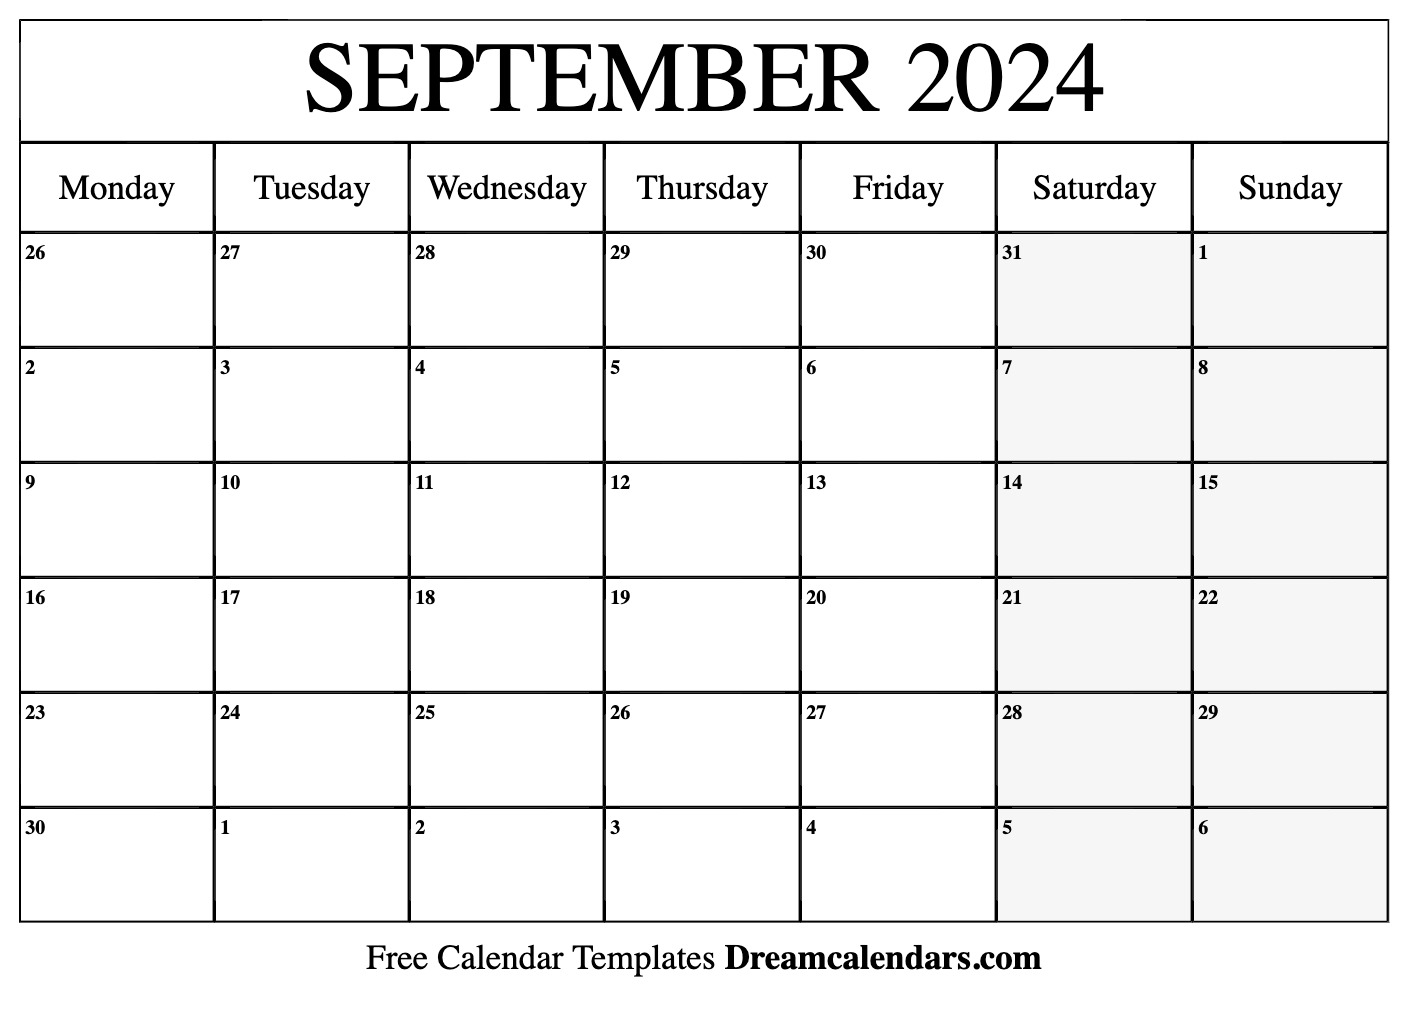 September 2024 Calendar - Free Printable with Holidays and Observances